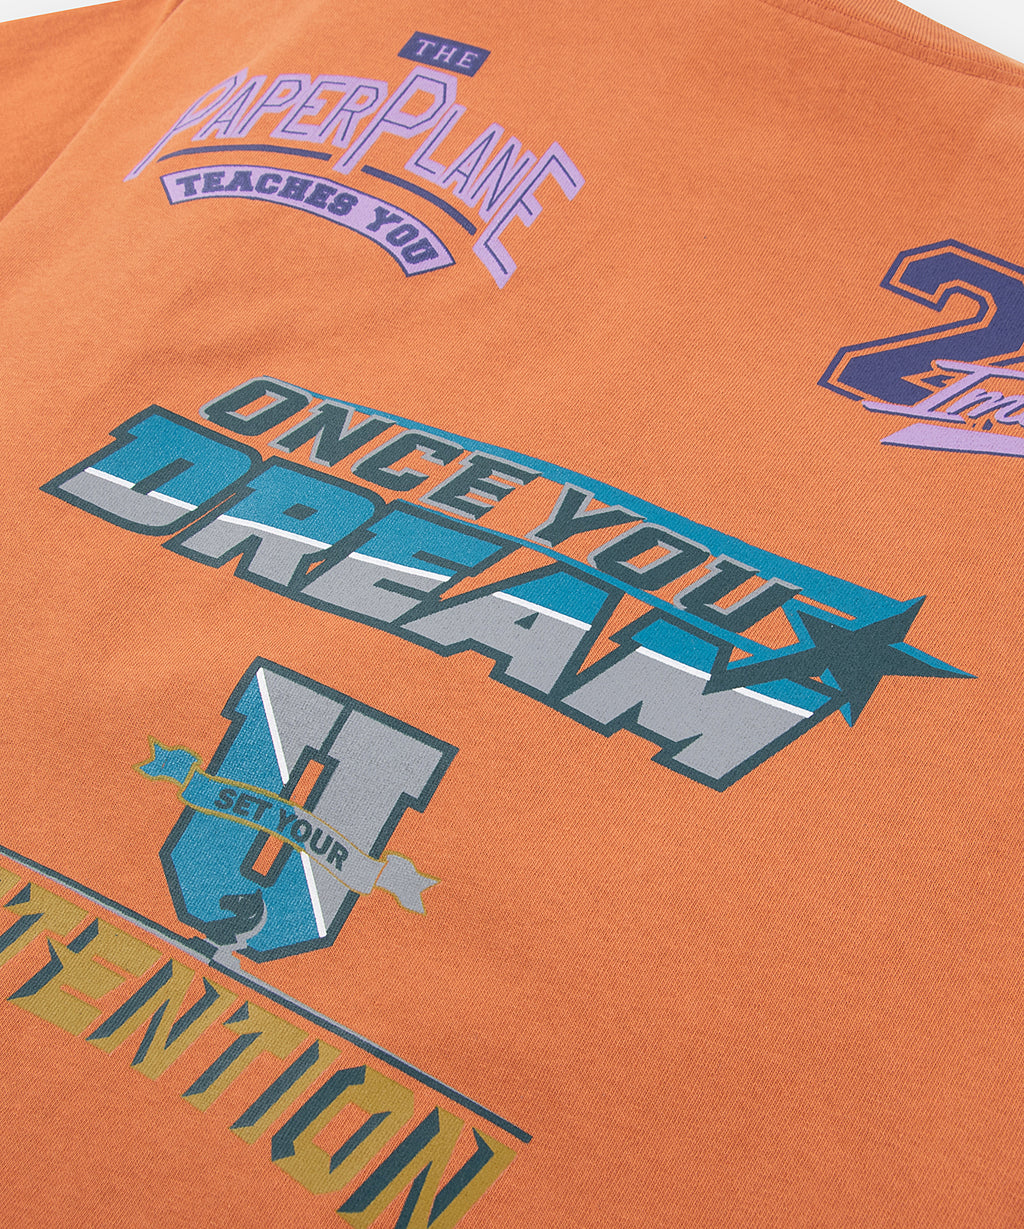  Printed art closeup on Paper Planes Intention It Heavyweight Tee, color Ginger.